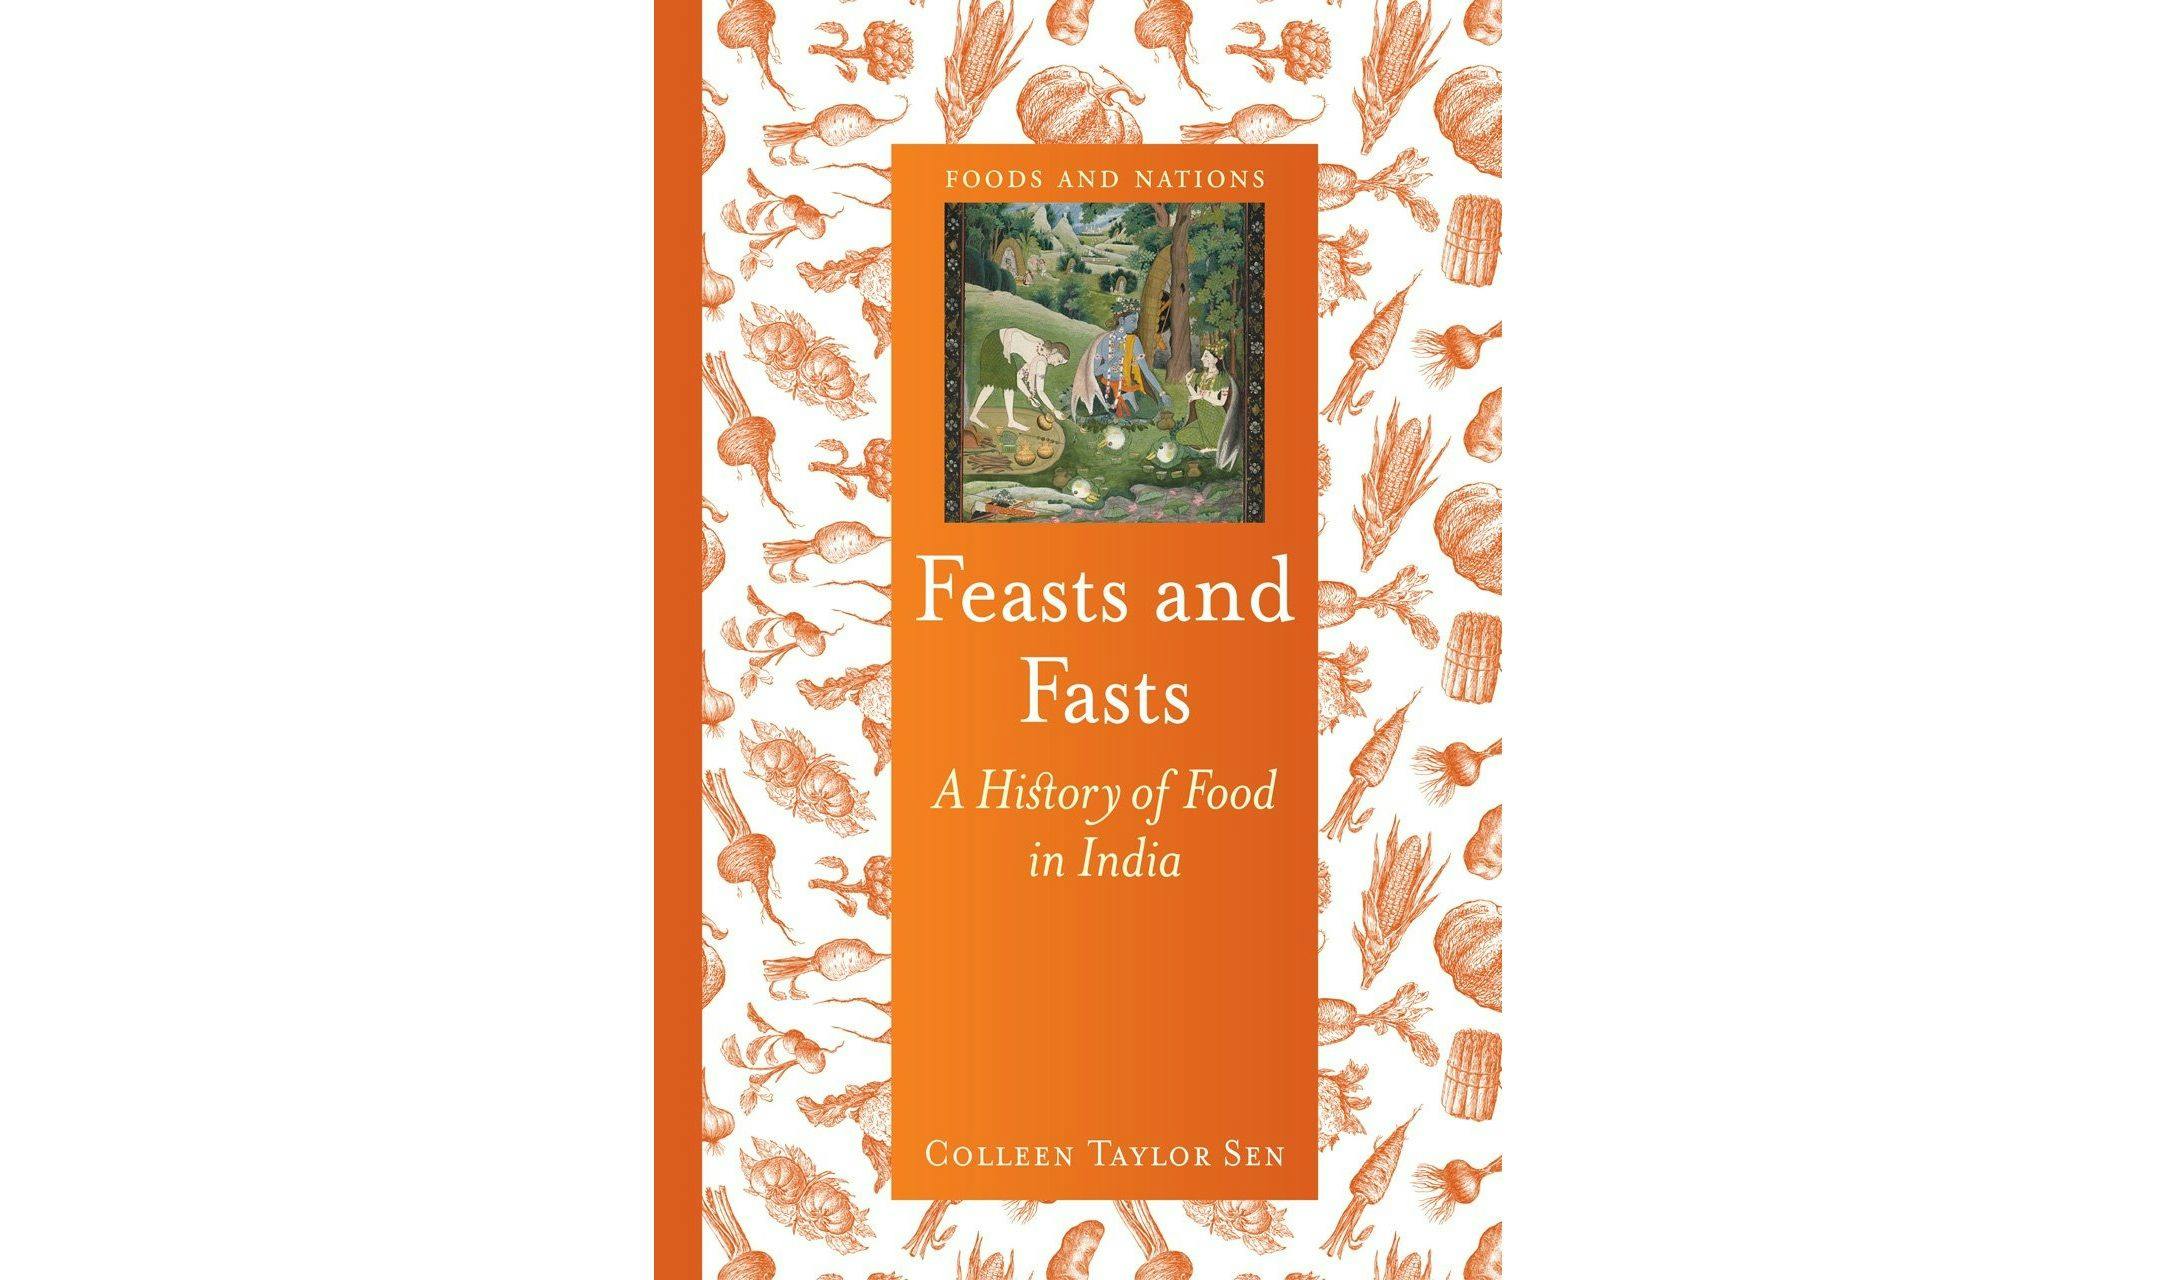 Colleen Taylor Sen’s book Feasts And Fasts: The History of Food in India